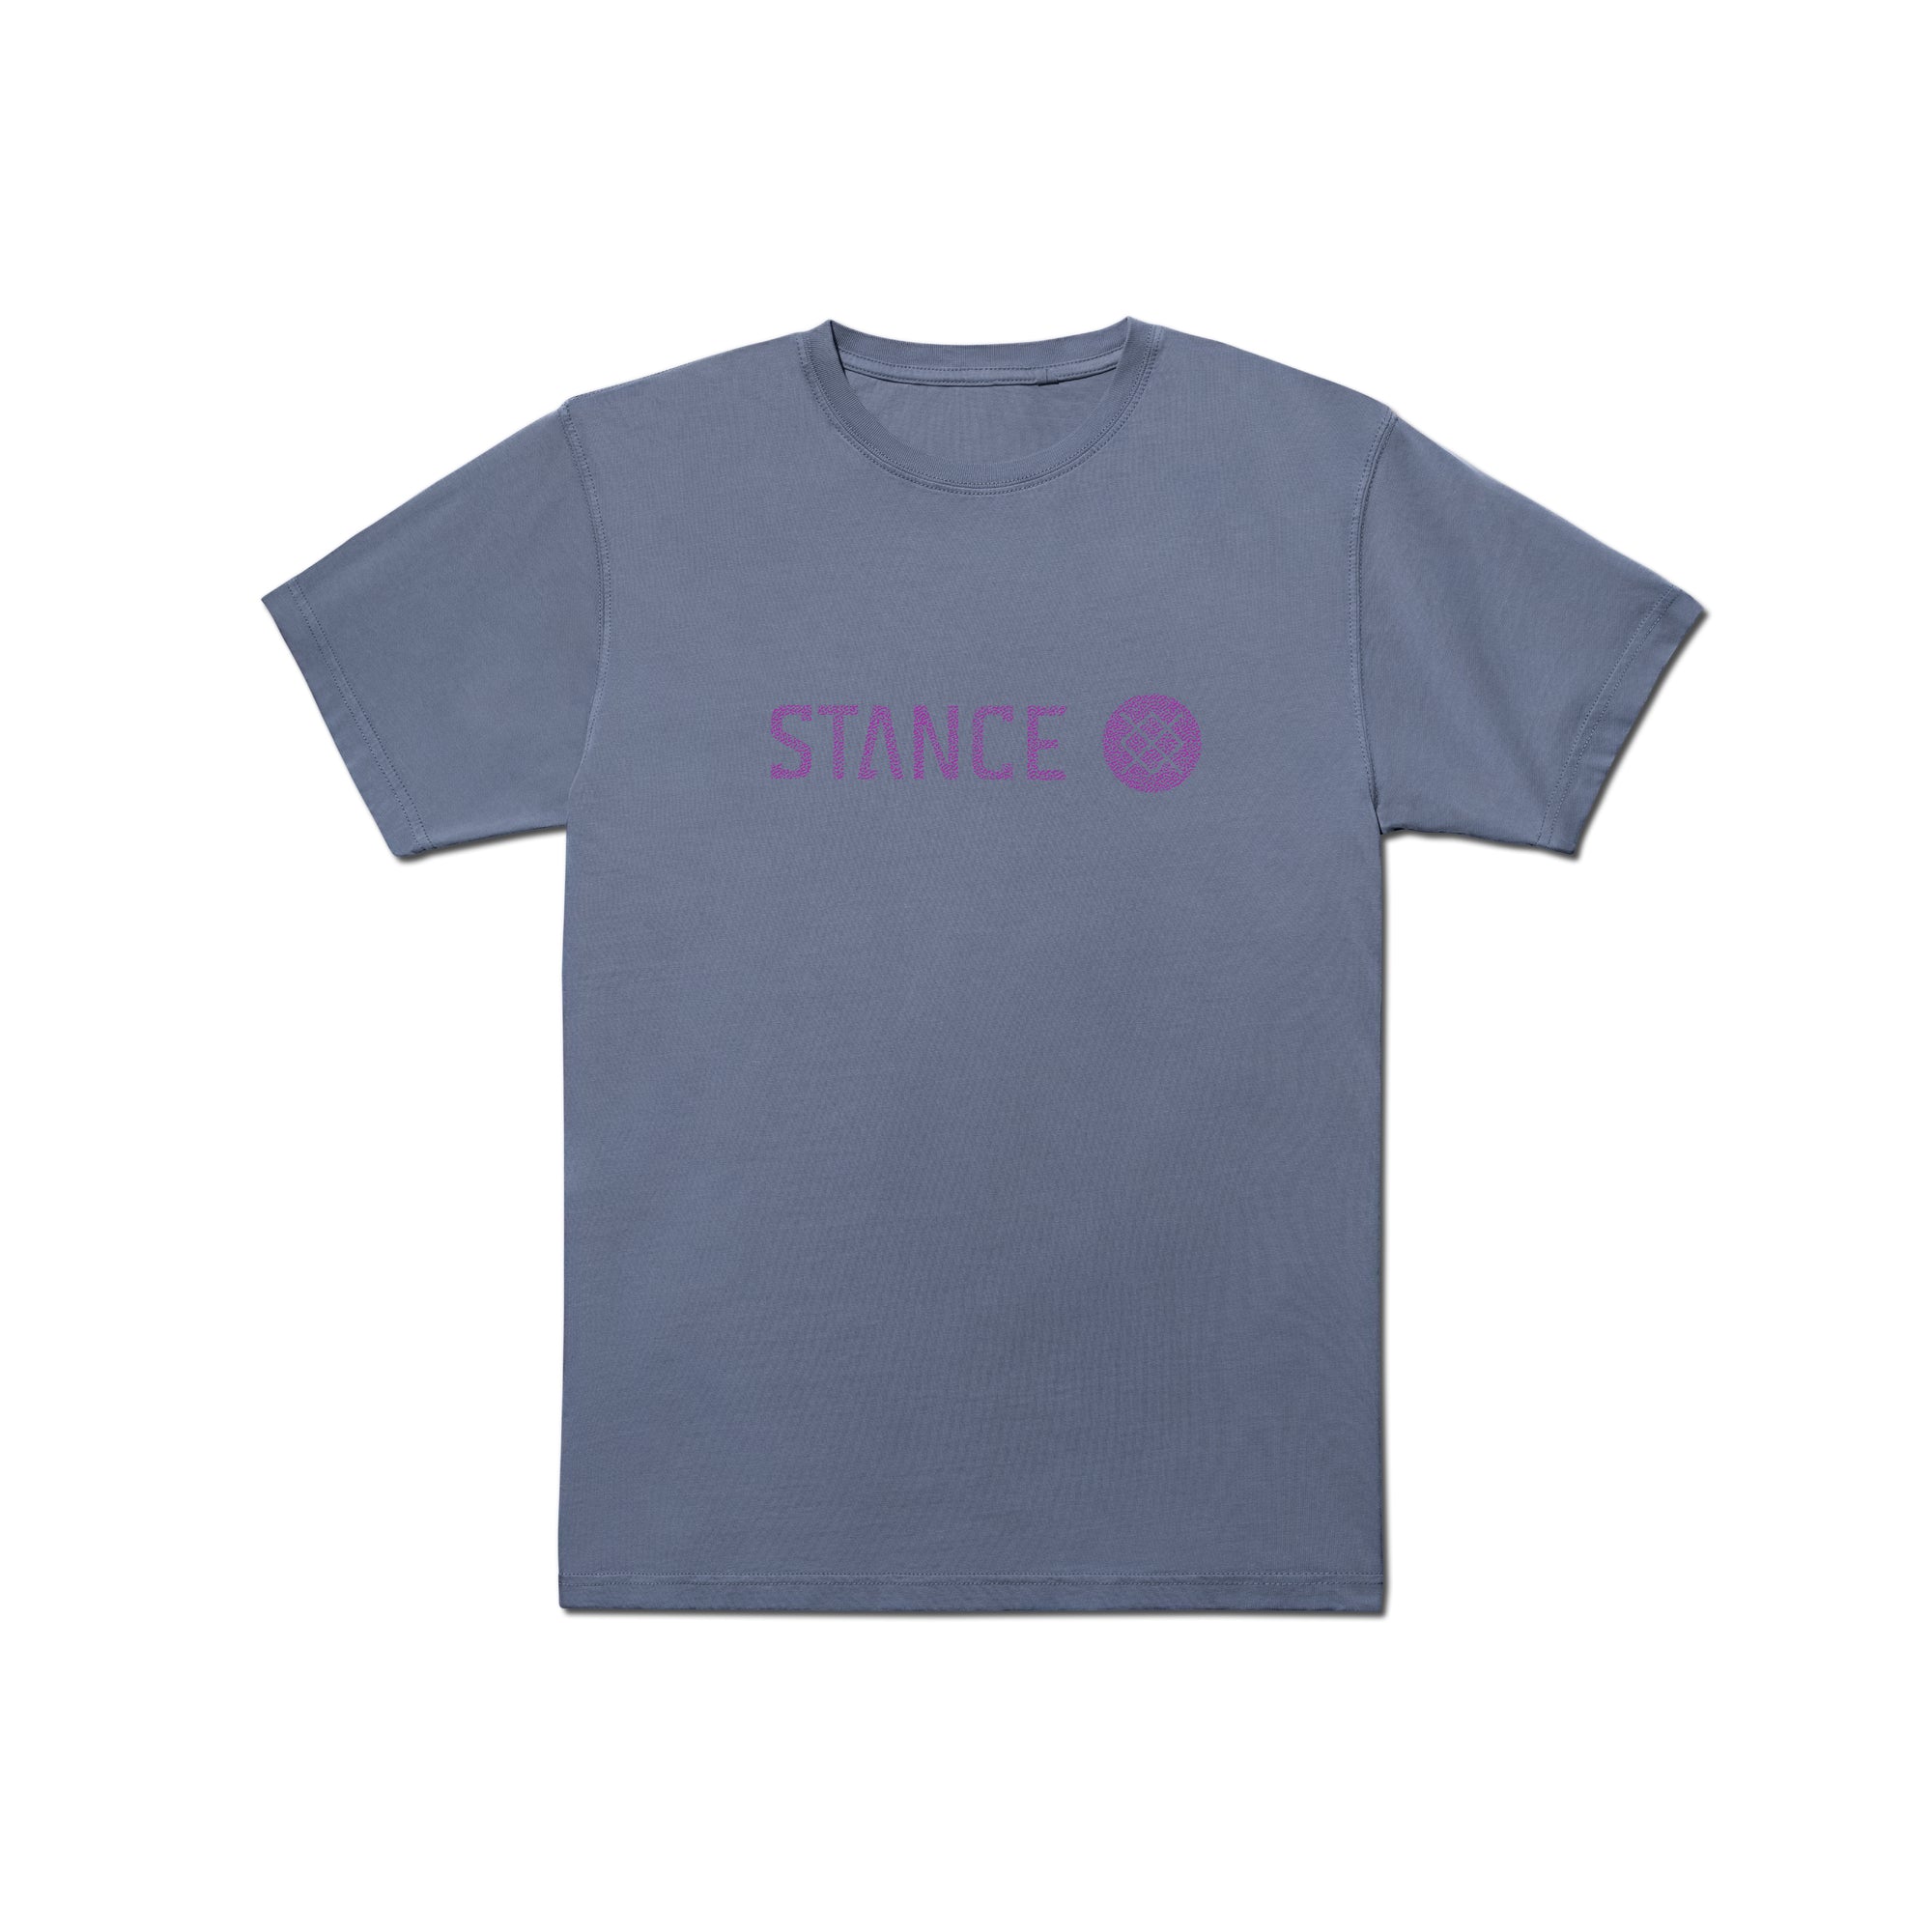 Basic Softness Hi-Lo Shirt in Dusty Blue - Retro, Indie and Unique Fashion